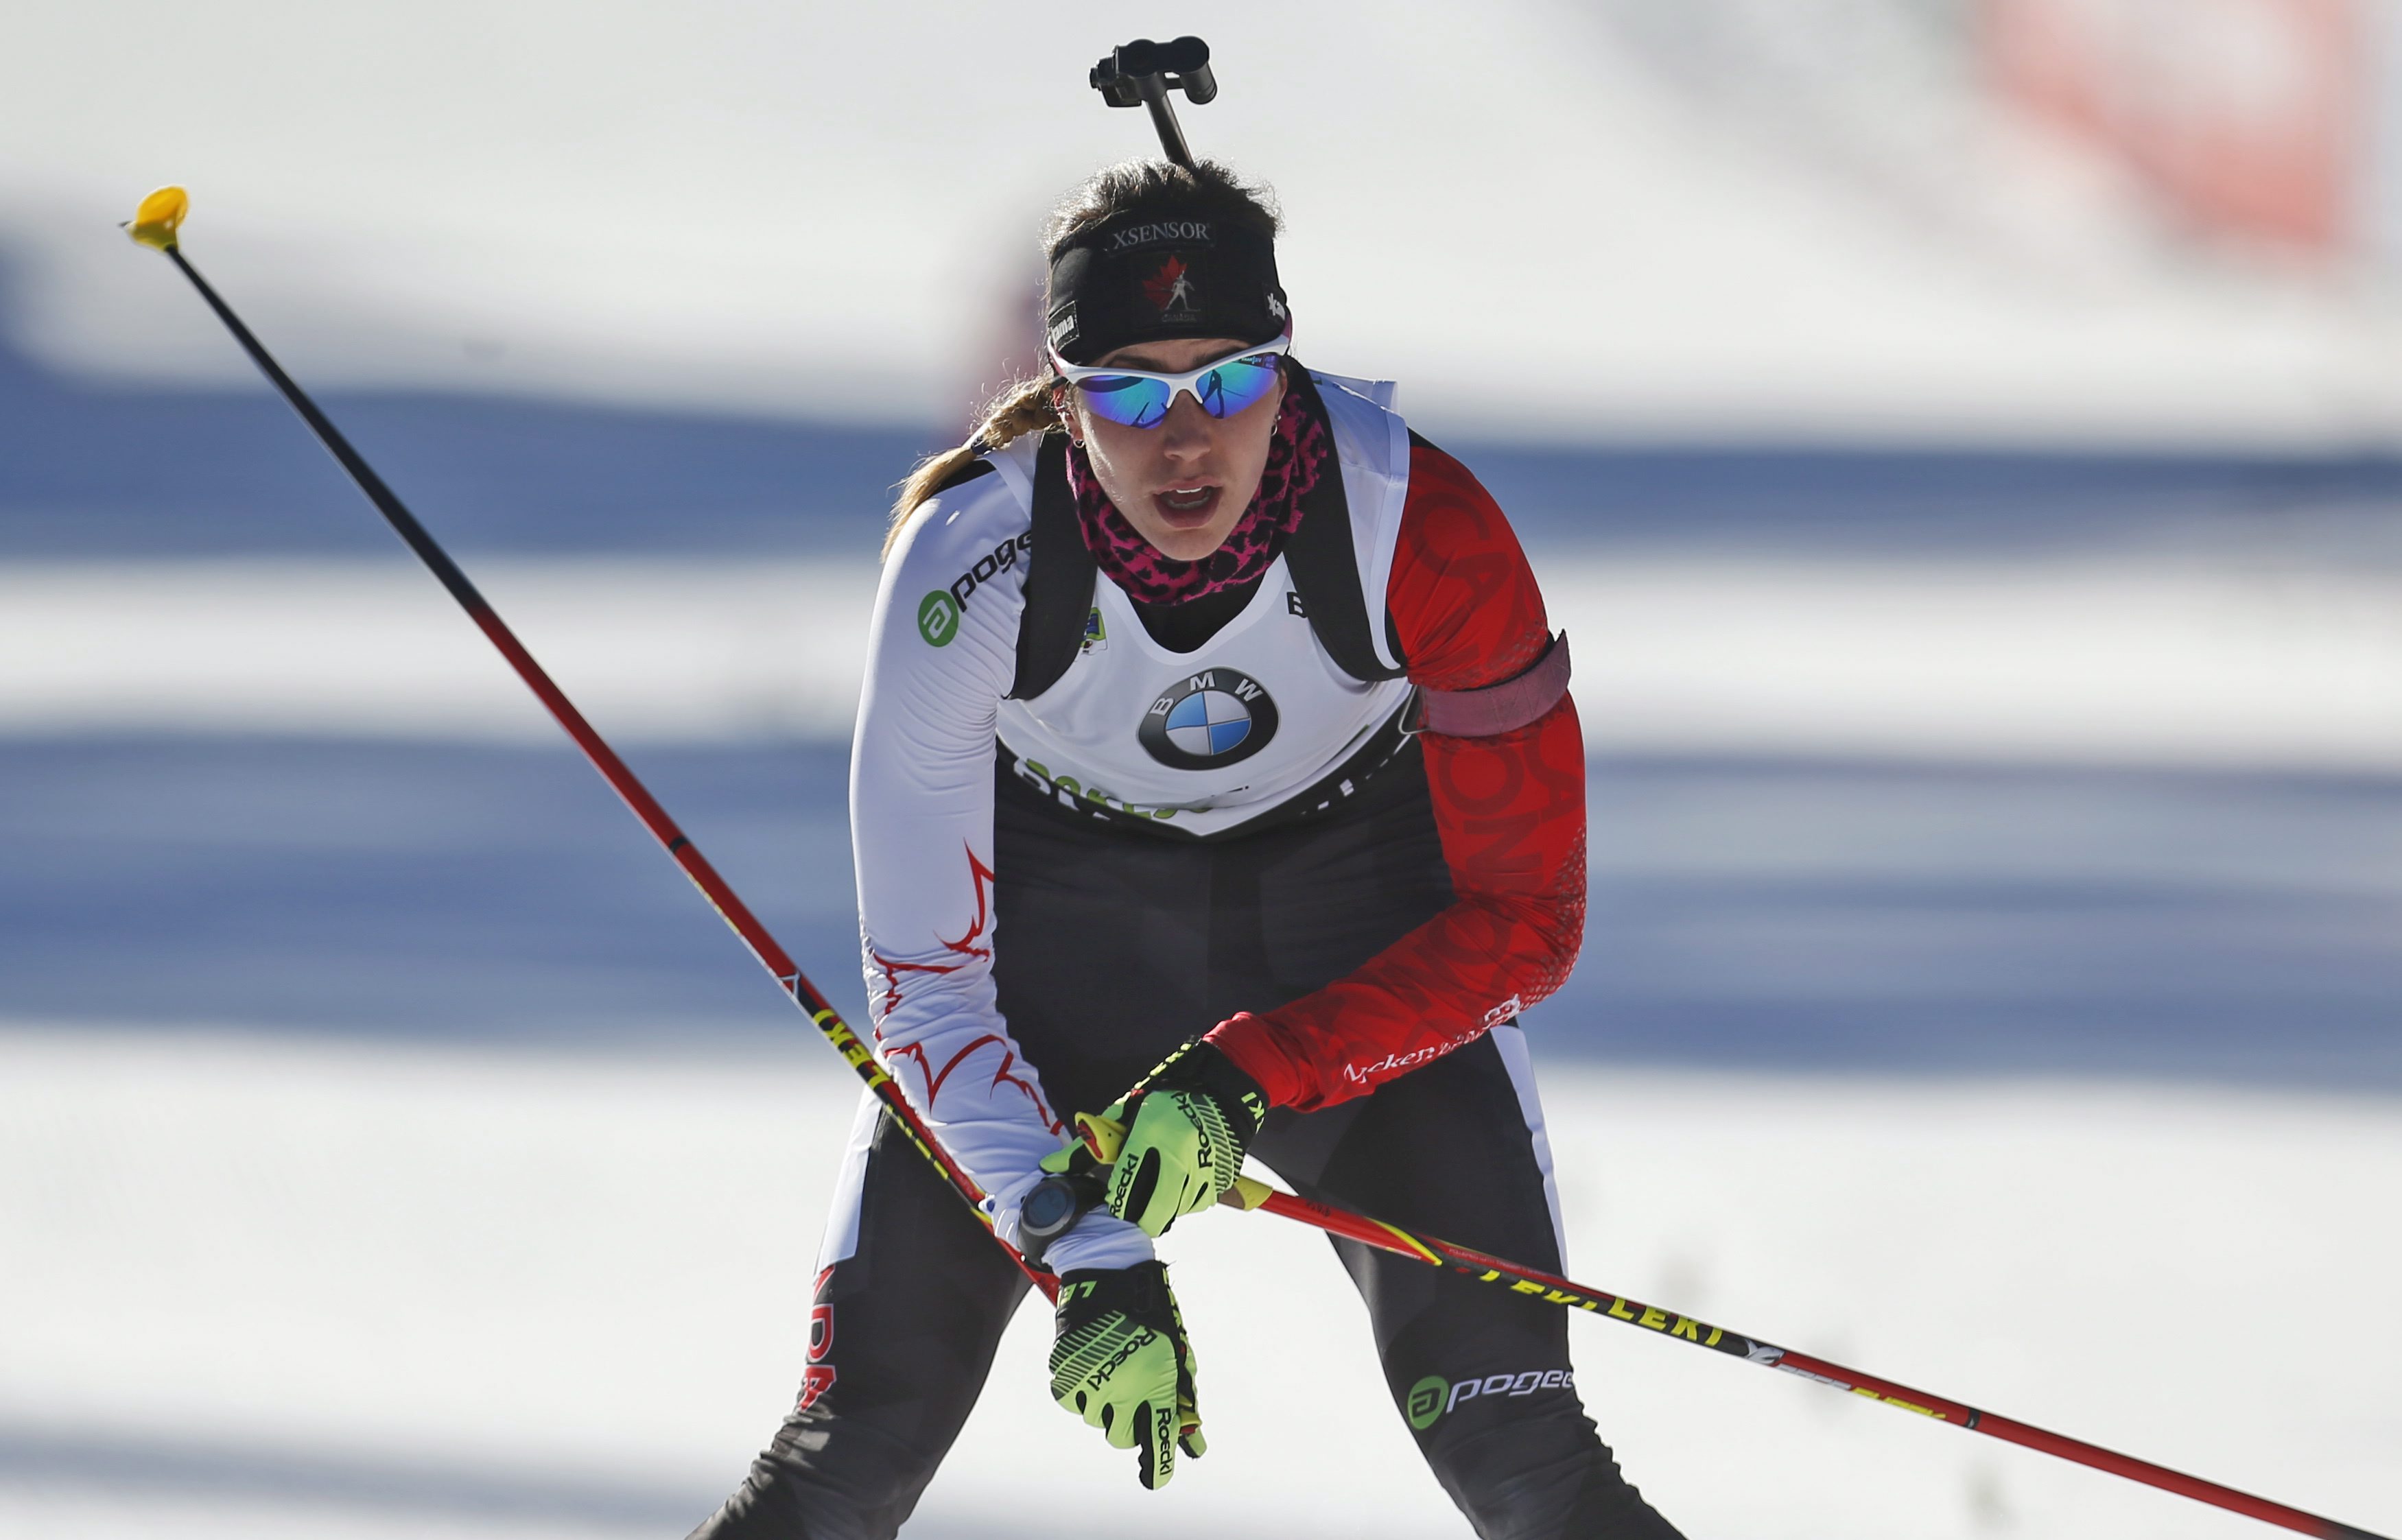 Canada's Rosanna Crawford enters the finish area to place seventh in the women's 10 km pursuit competition at the Biathlon World Cup event, in Pokljuka, Slovenia, Saturday, Dec. 20, 2014. (AP Photo/Darko Bandic)